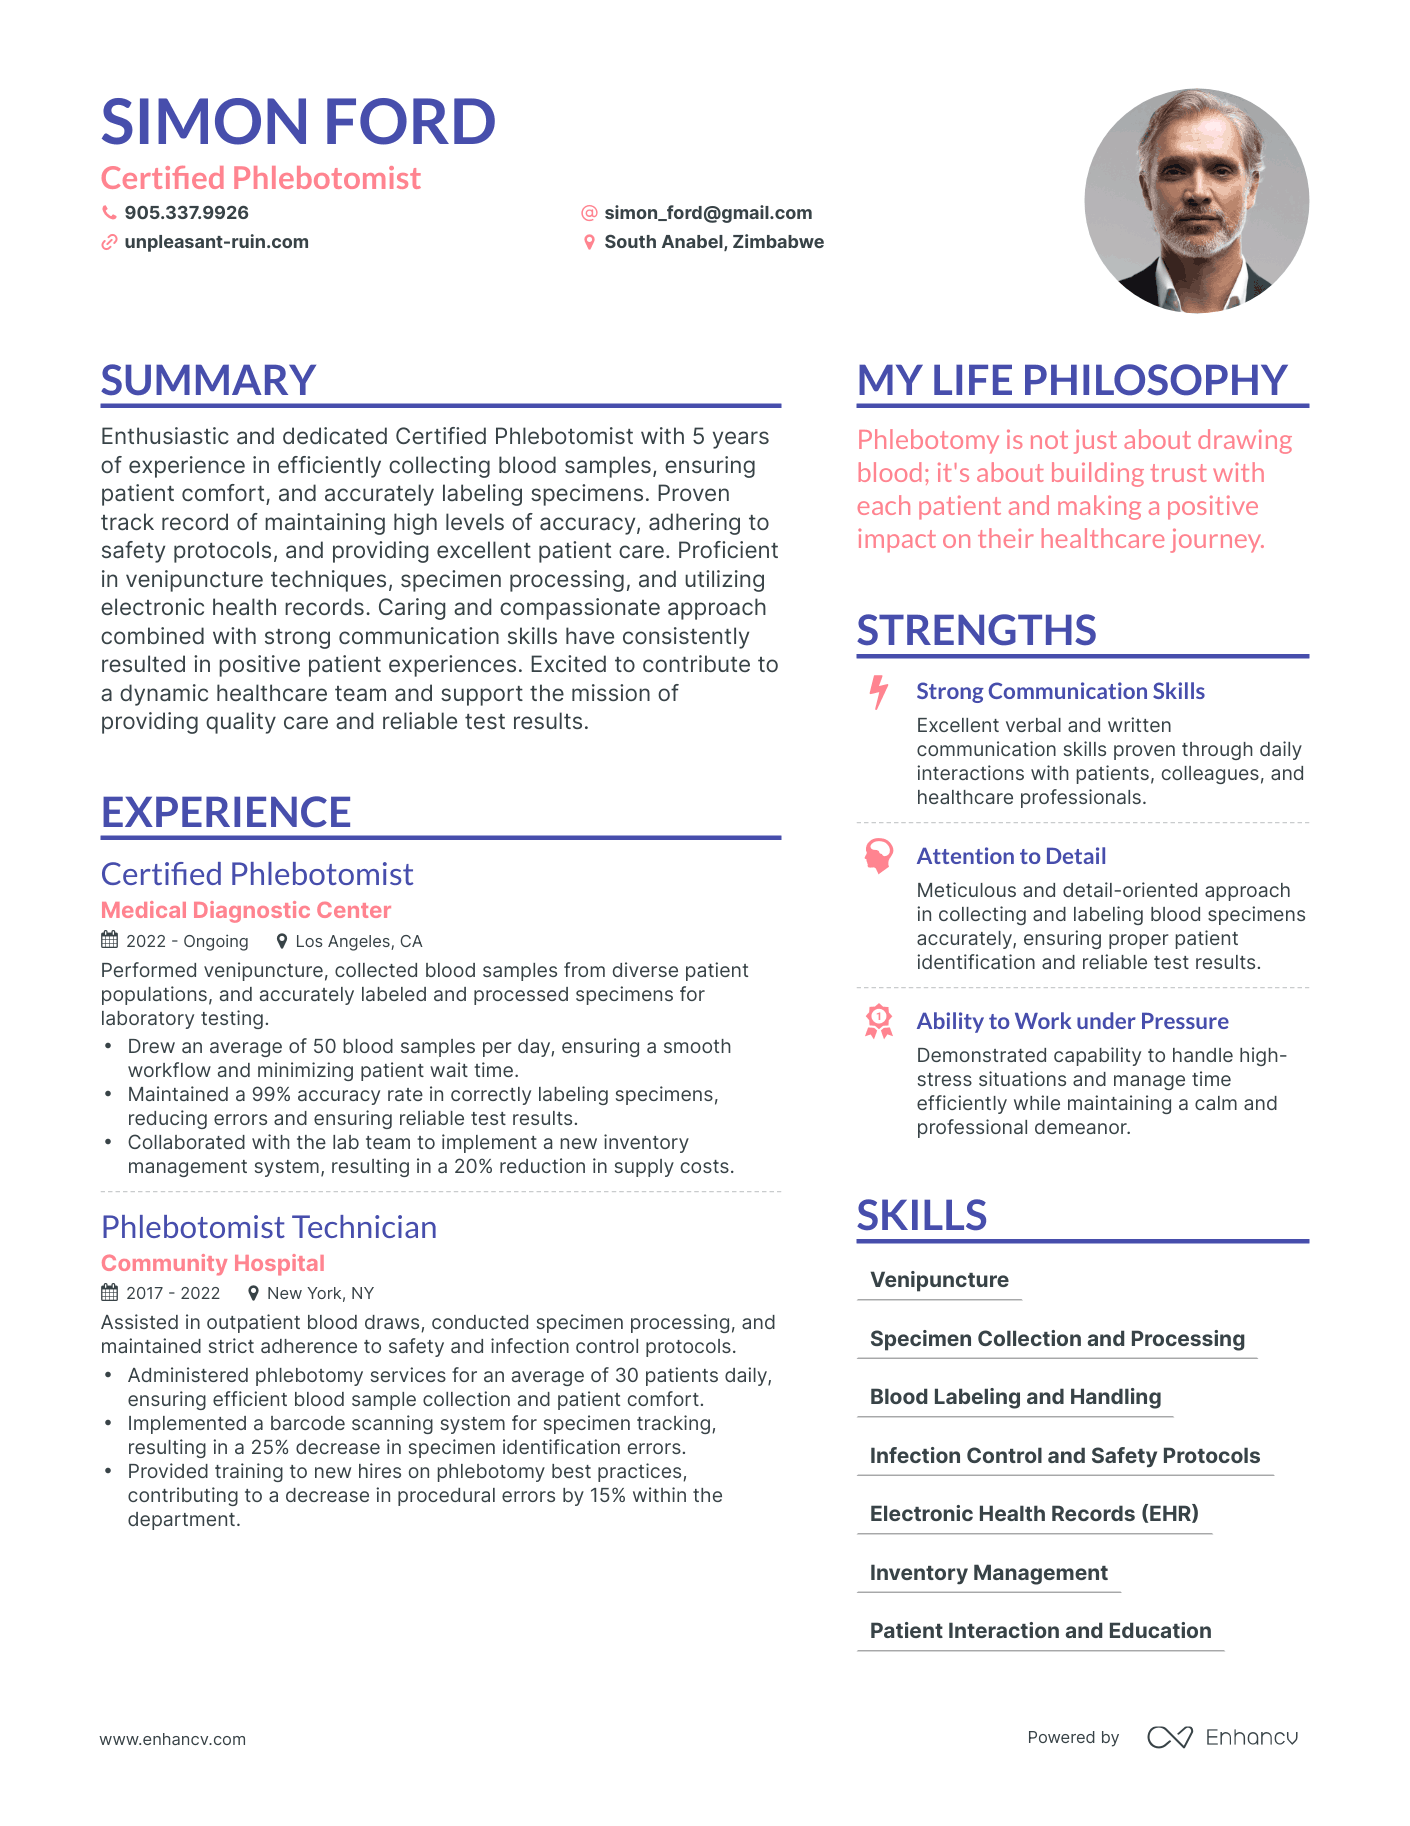 Certified Phlebotomist resume example